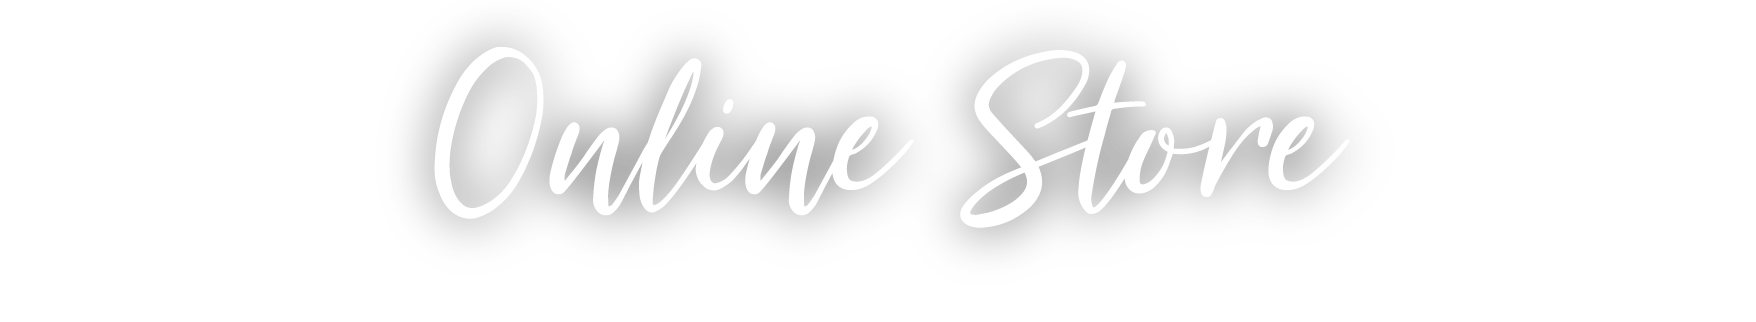 White cursive text that reads: Online Store